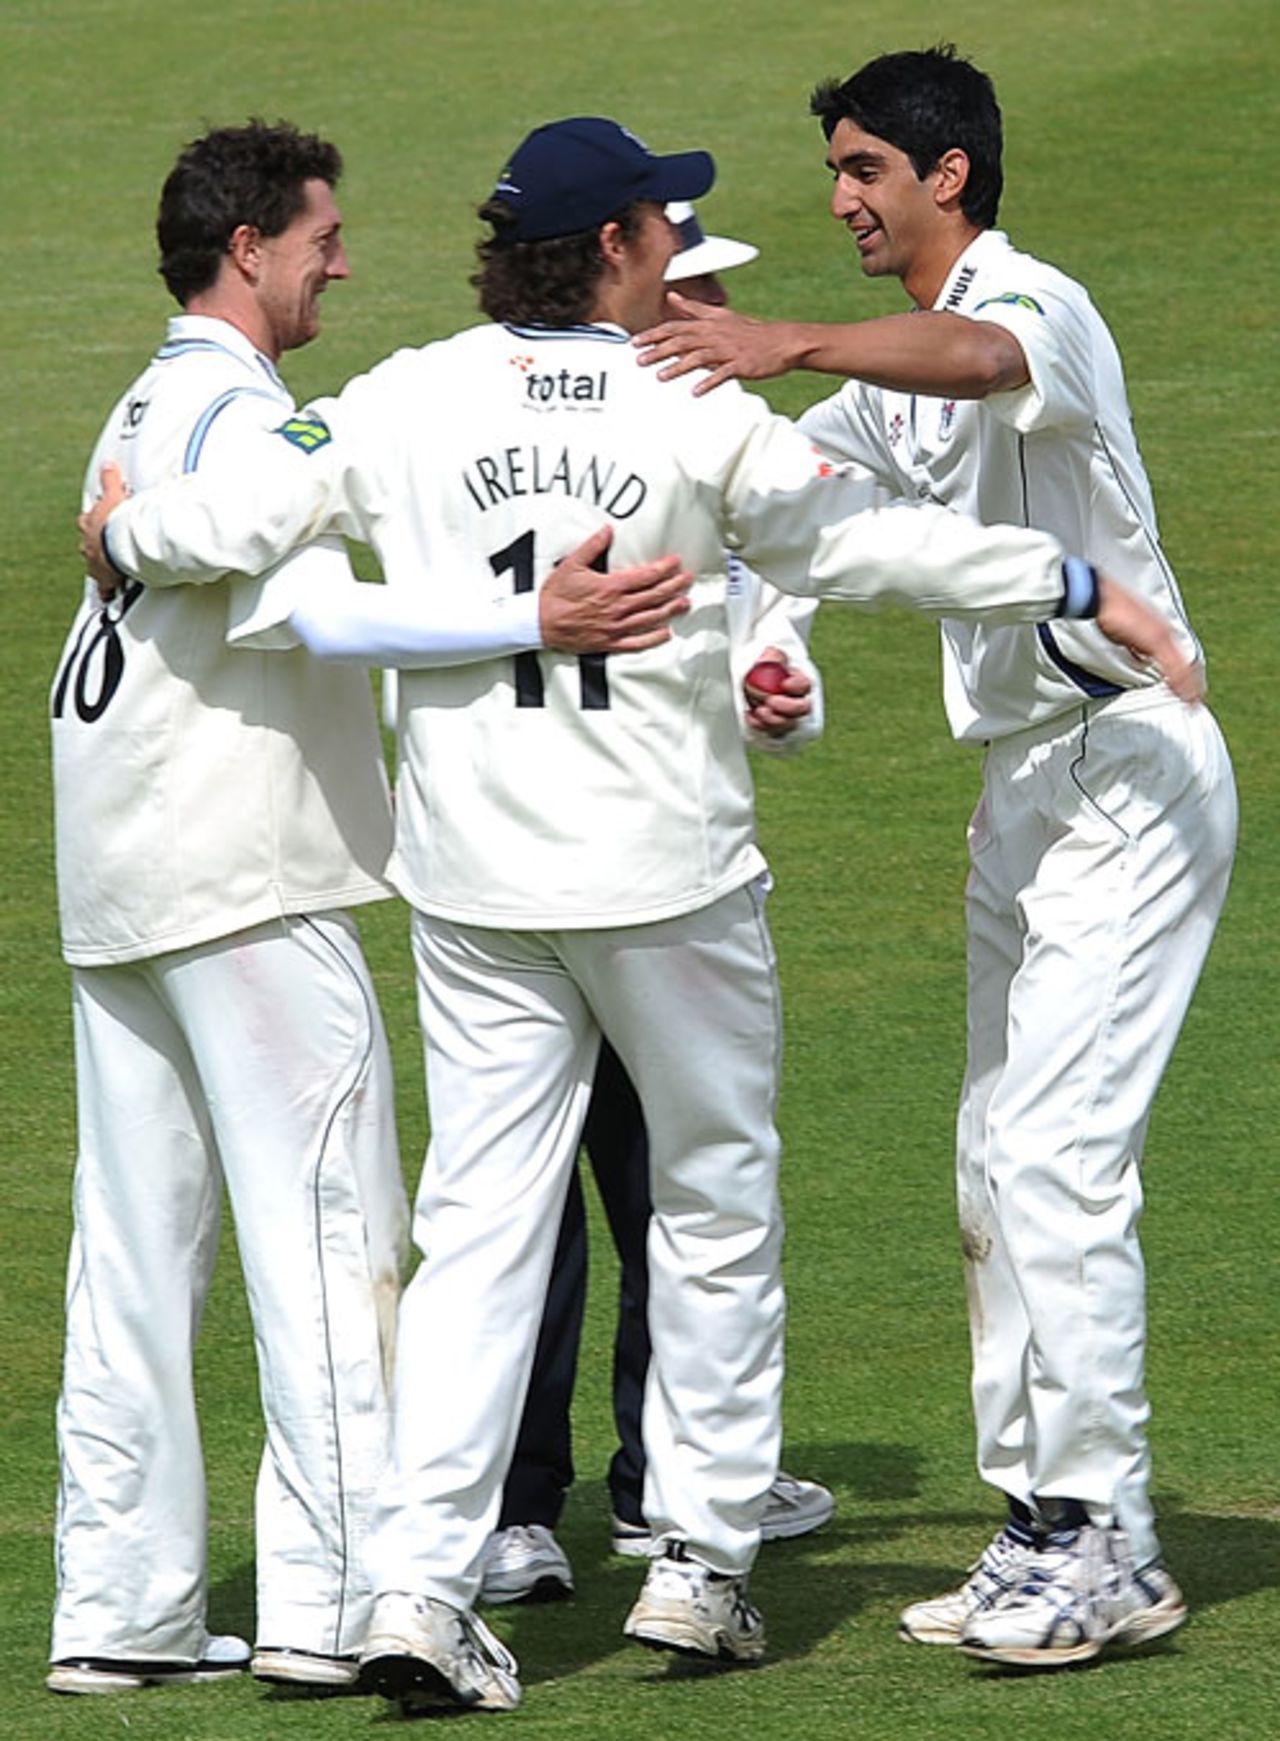 Gemaal Hussain is congratulated by his Gloucestershire team-mates as his five wickets helped them to victory, Middlesex v Gloucestershire, County Championship, Division Two, Lord's, April 30, 2010